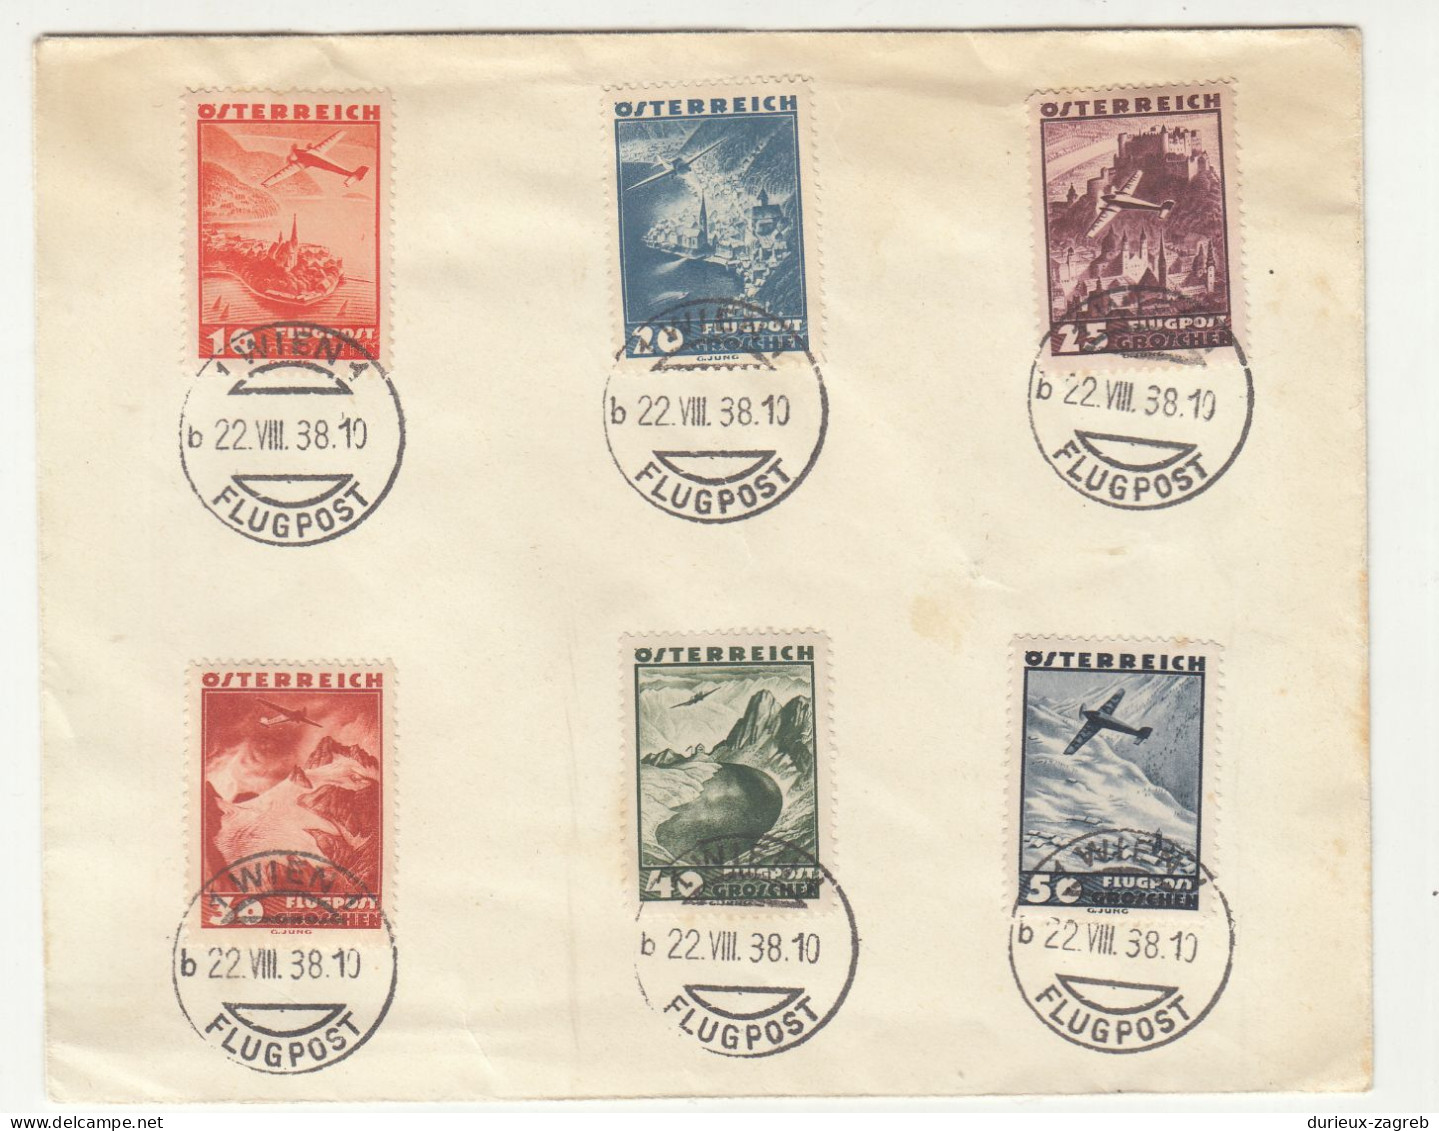 Austria 1938 Air Mail Stamps Postmarked On Letter Cover Not Posted B240401 - Gebruikt